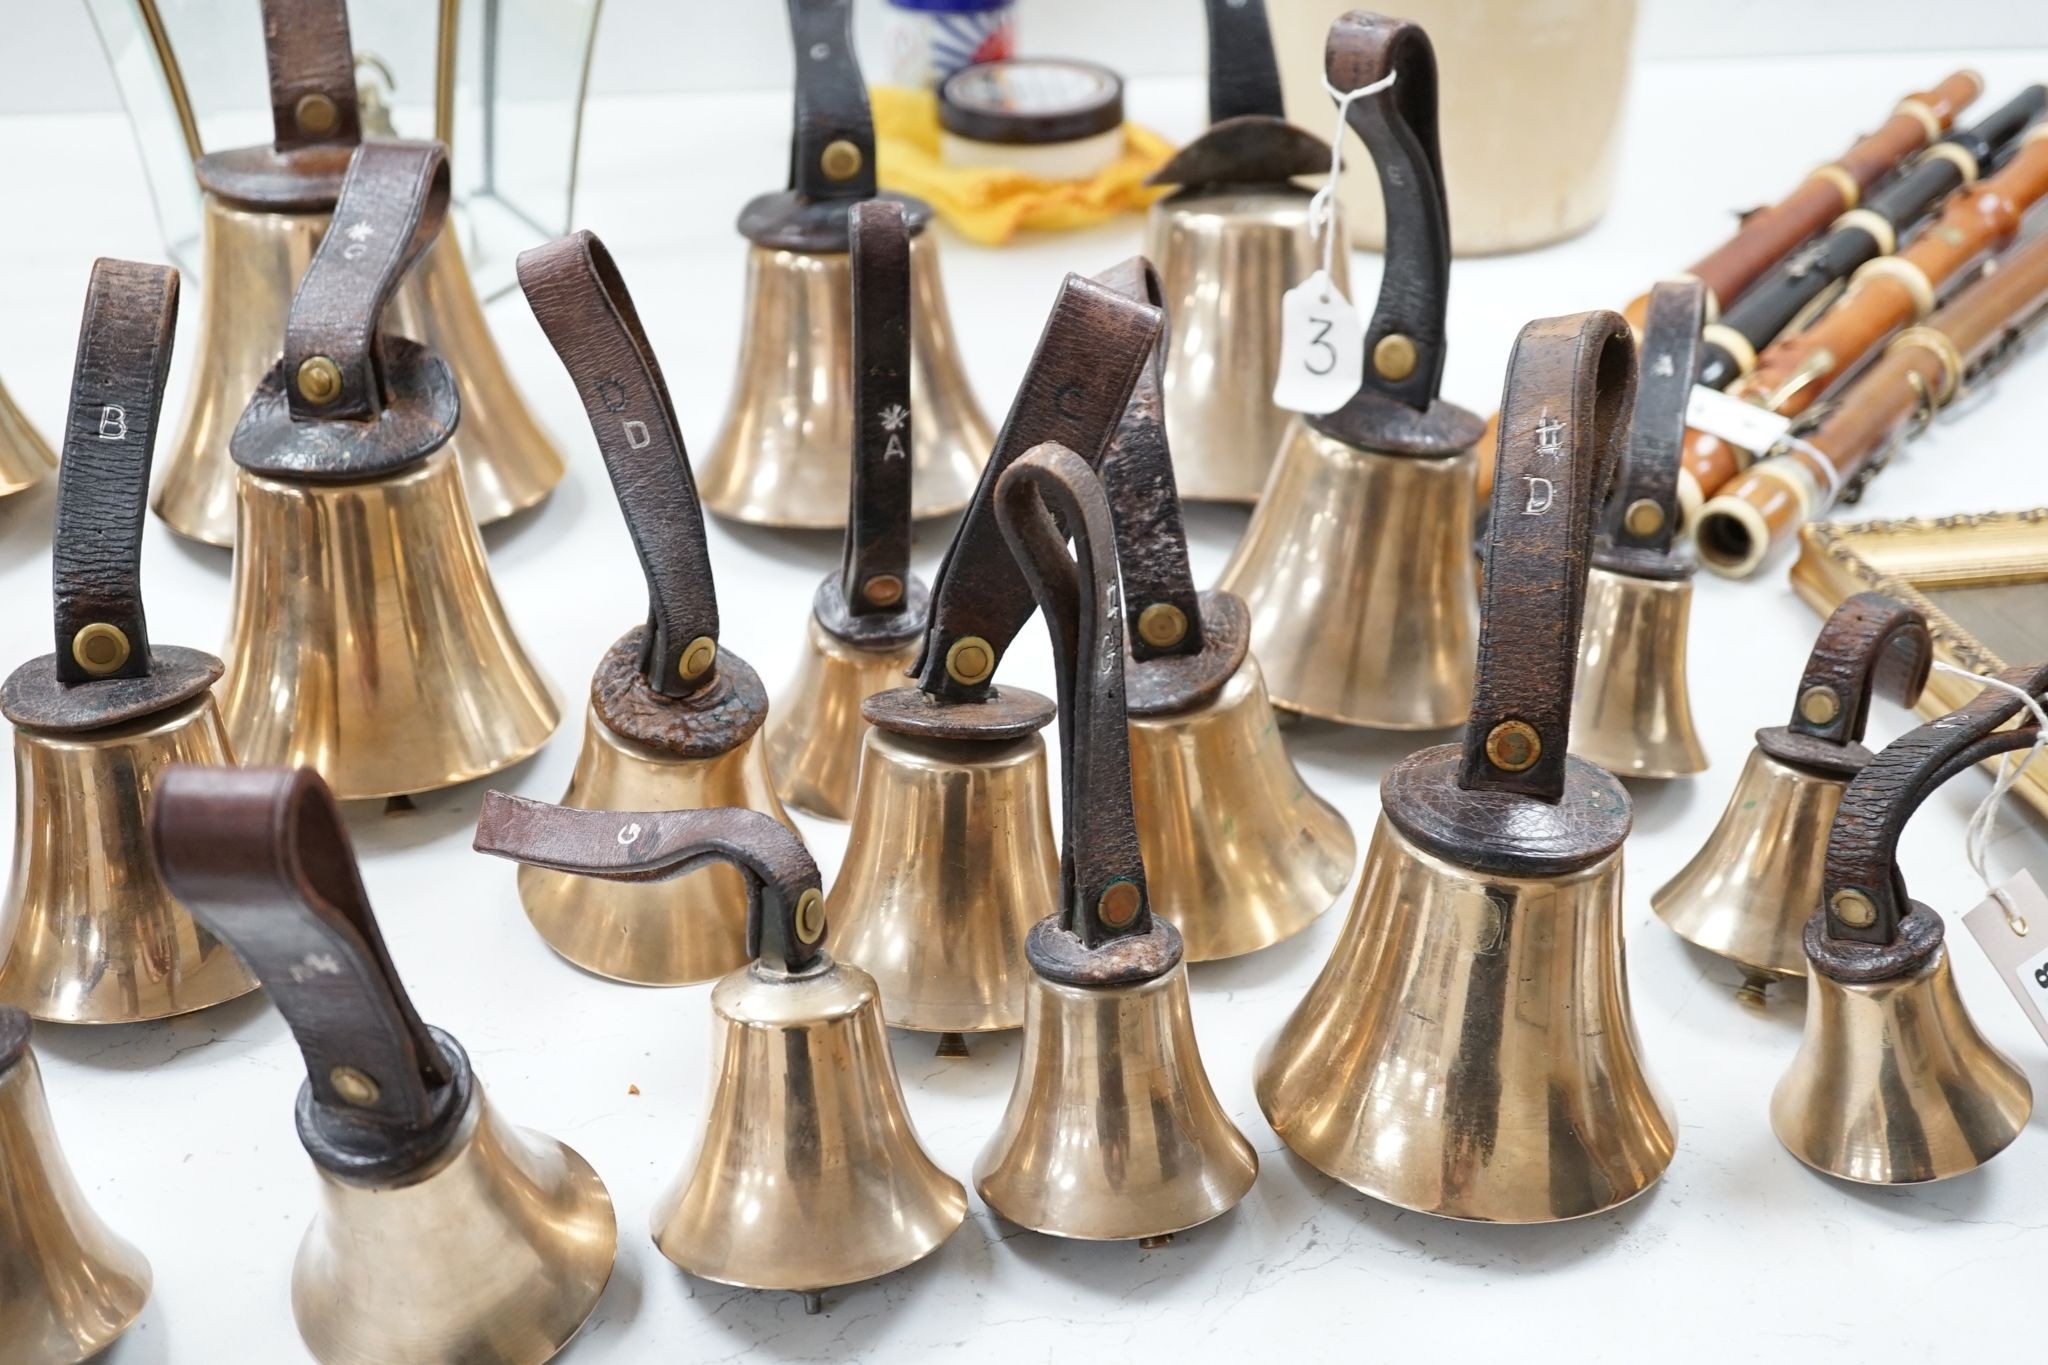 A rare set of 32 Whitechapel musical handbells, full chromatic scale, circa 1900, largest 23cm, including leather strap.